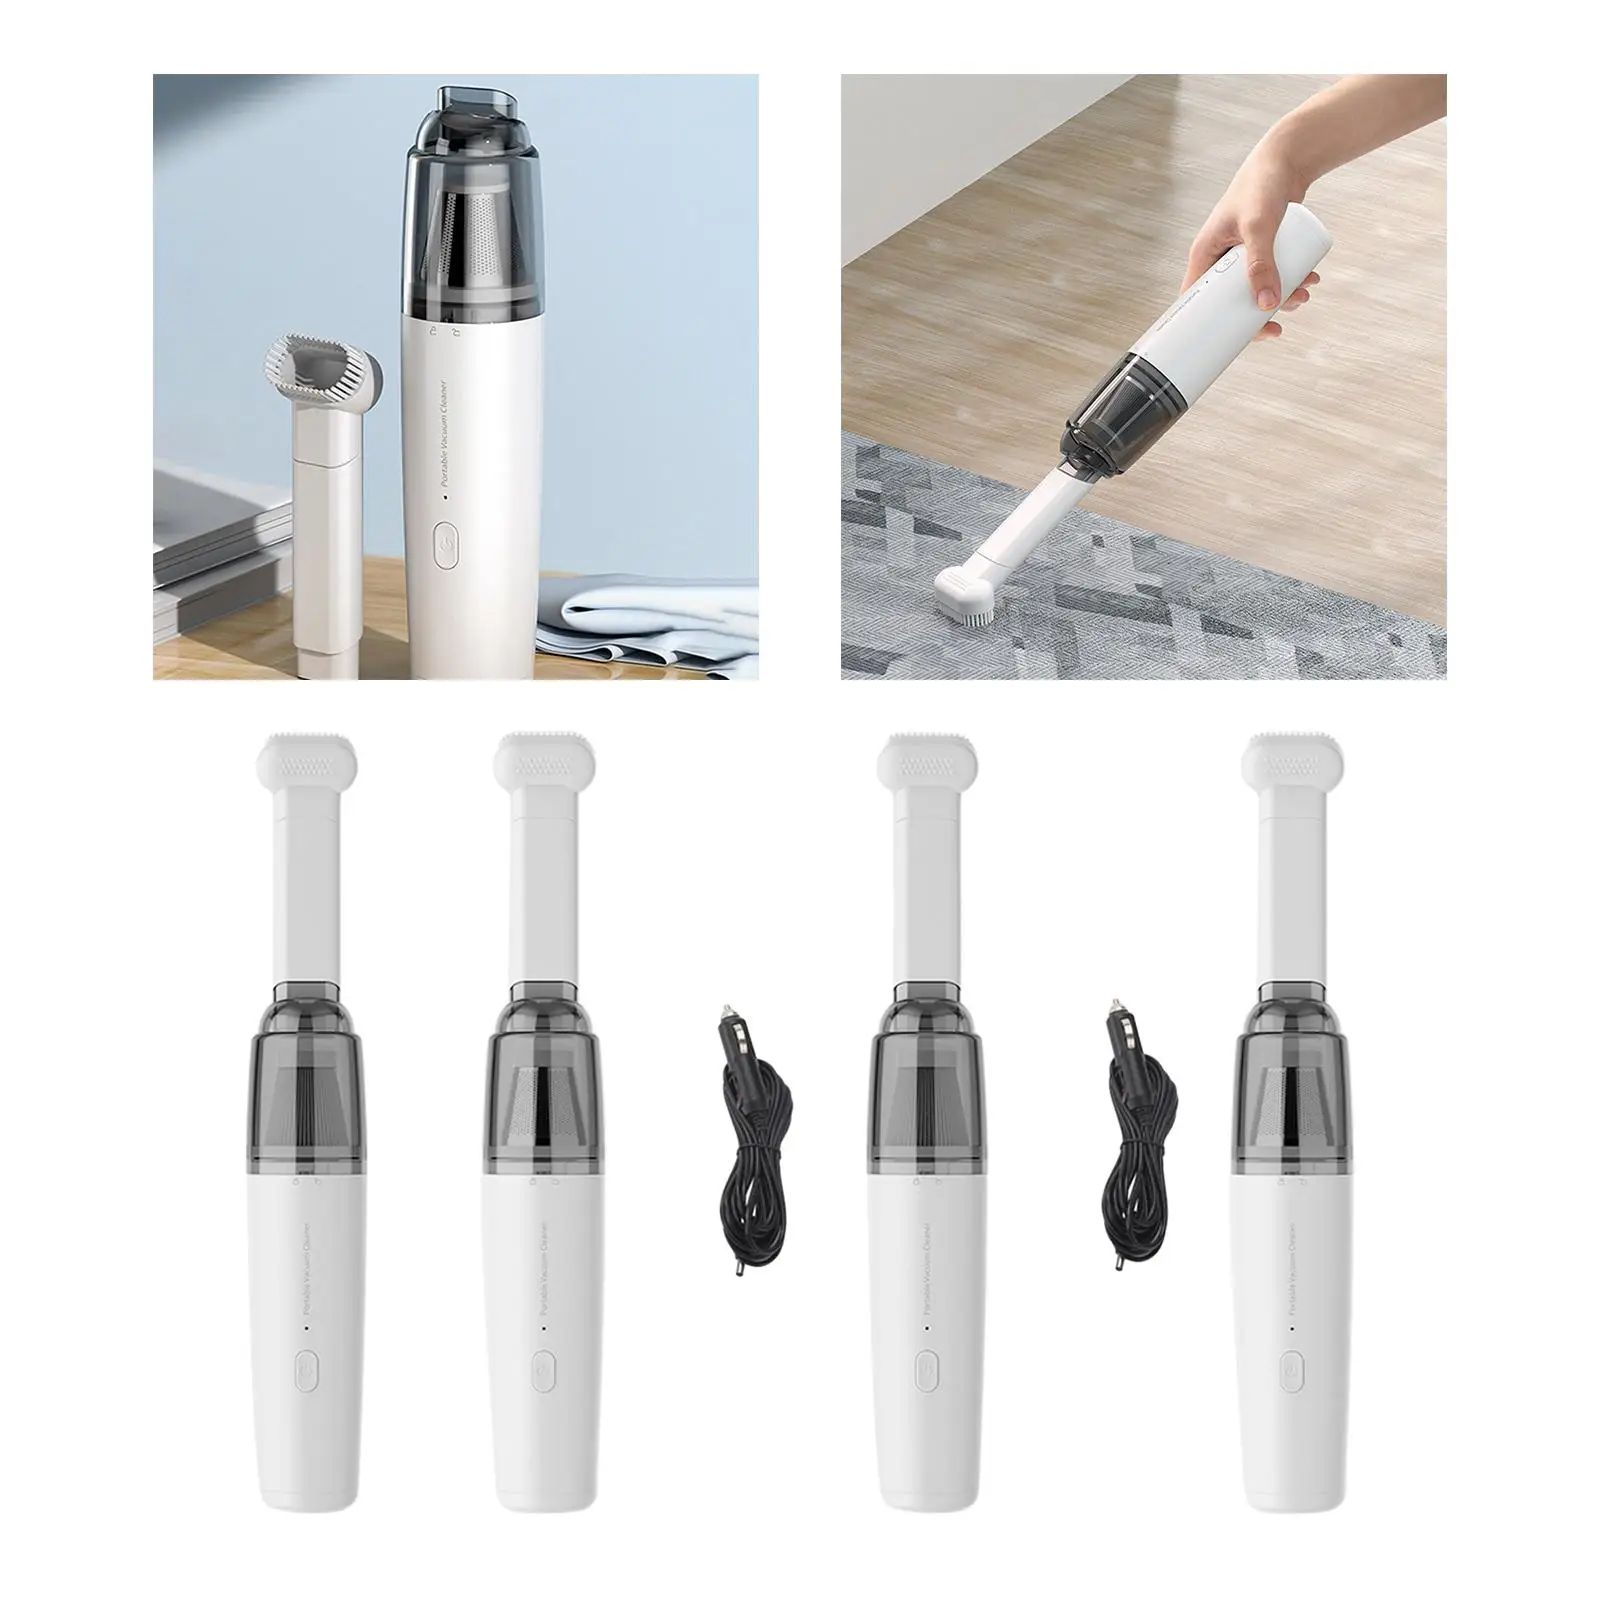 Handheld Vacuum Cleaner High Power 130ml Dustbowl Lightweight for